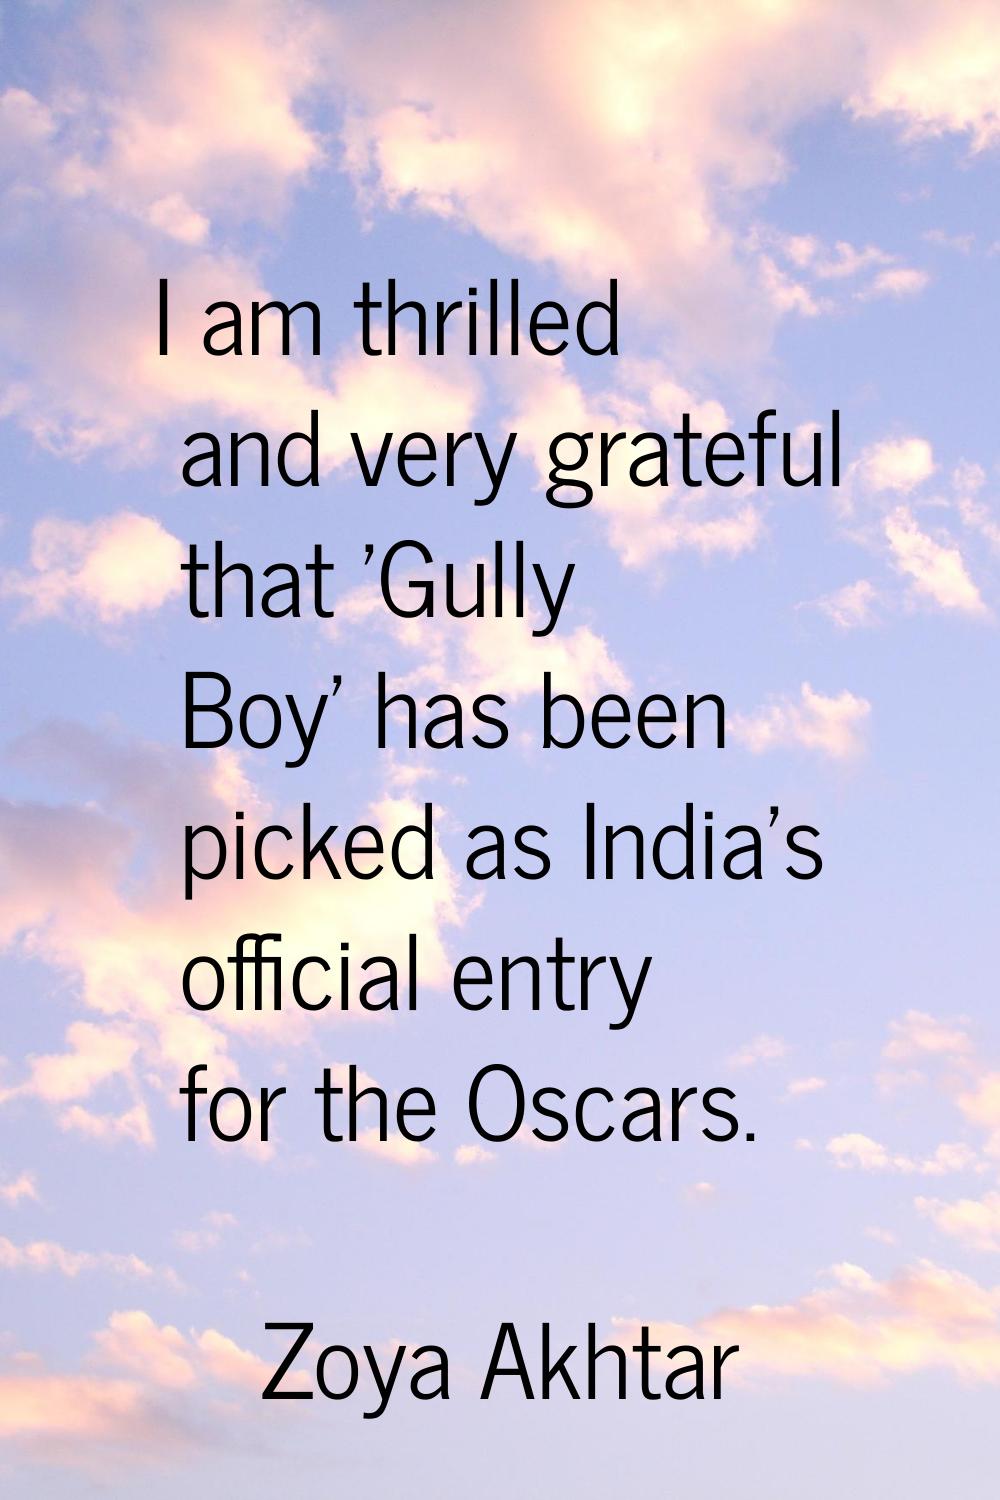 I am thrilled and very grateful that 'Gully Boy' has been picked as India's official entry for the 